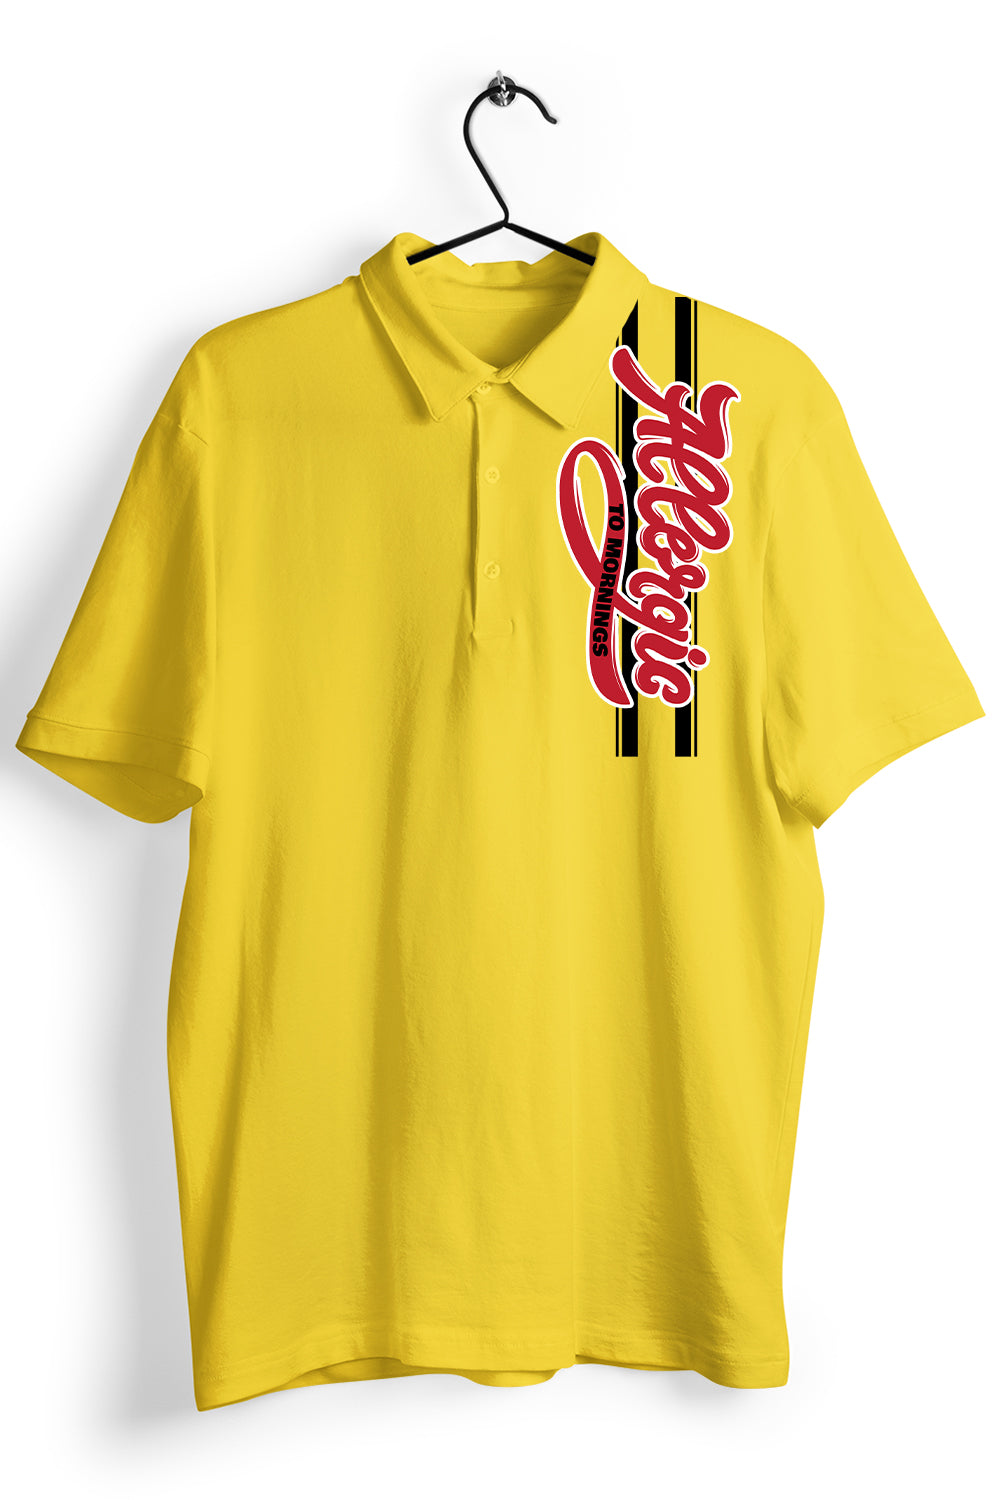 Allergic to Morning Graphic Pocket Printed Yellow Polo Shirt